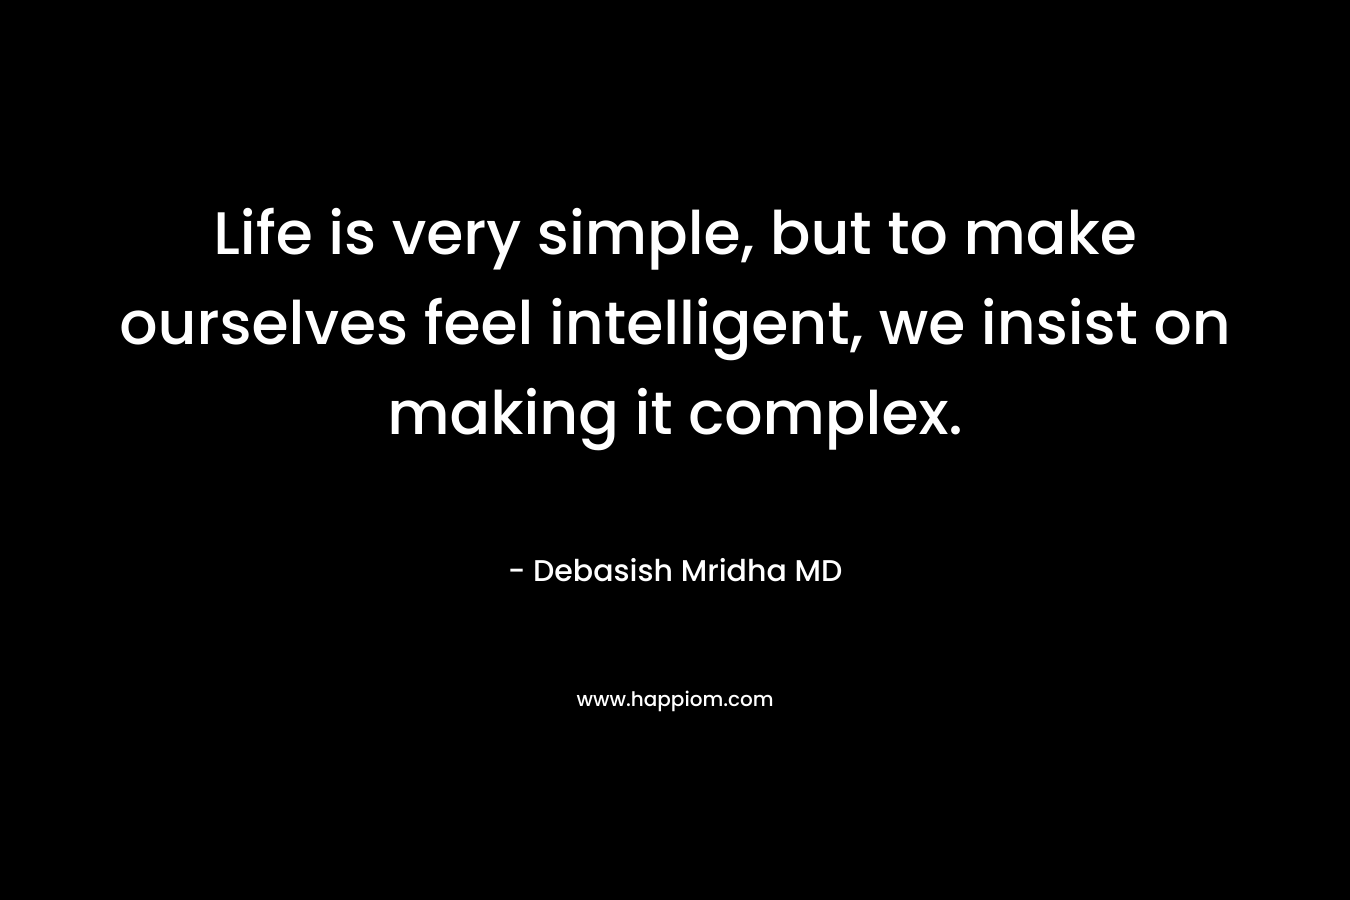 Life is very simple, but to make ourselves feel intelligent, we insist on making it complex.